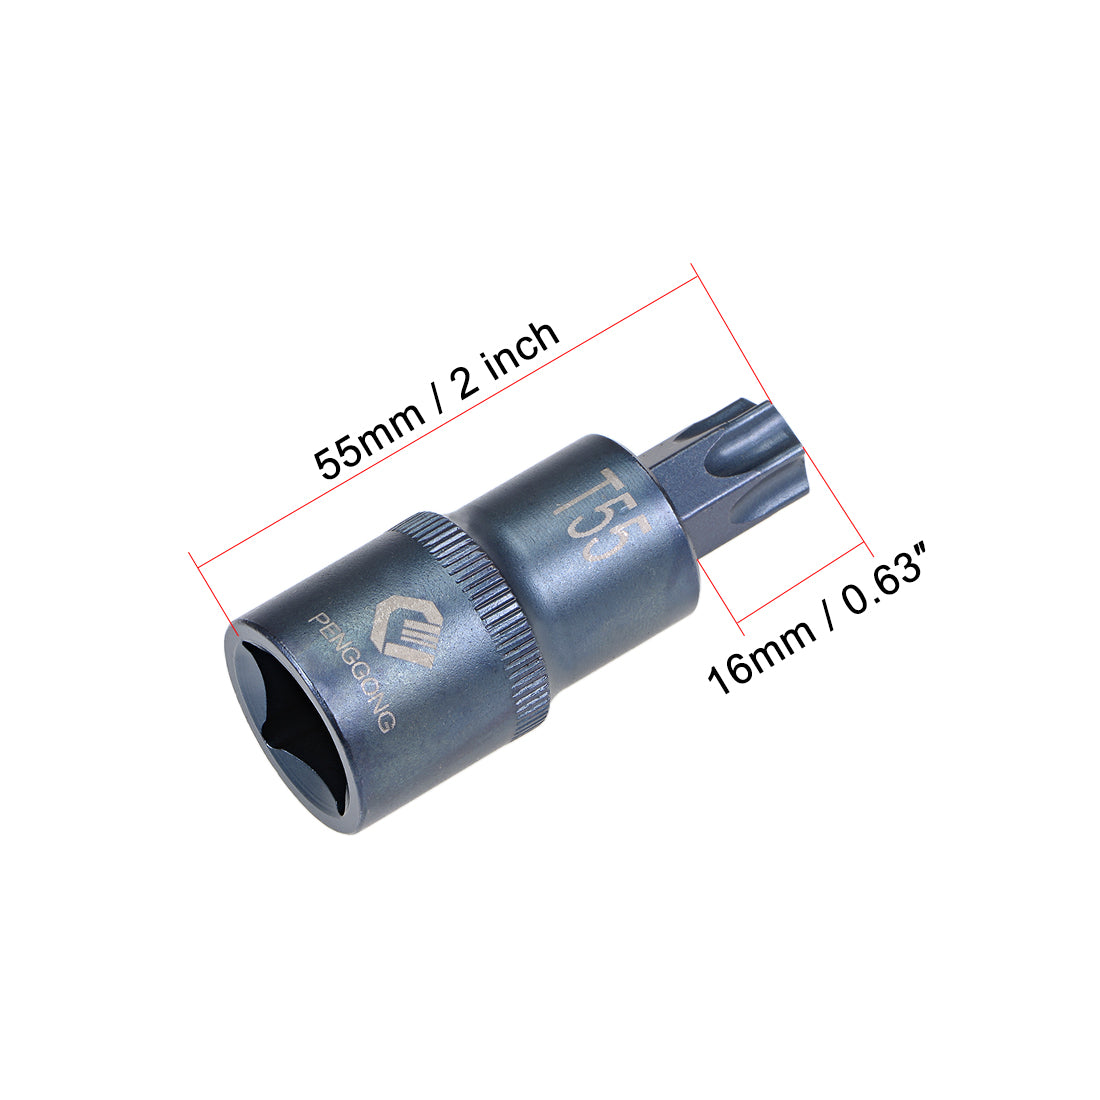 uxcell Uxcell 1/2" Drive x T55 Torx Bit Socket, S2 Steel Bits, CR-V Sockets Metric 2" Length (For Hand Use Only) 2pcs